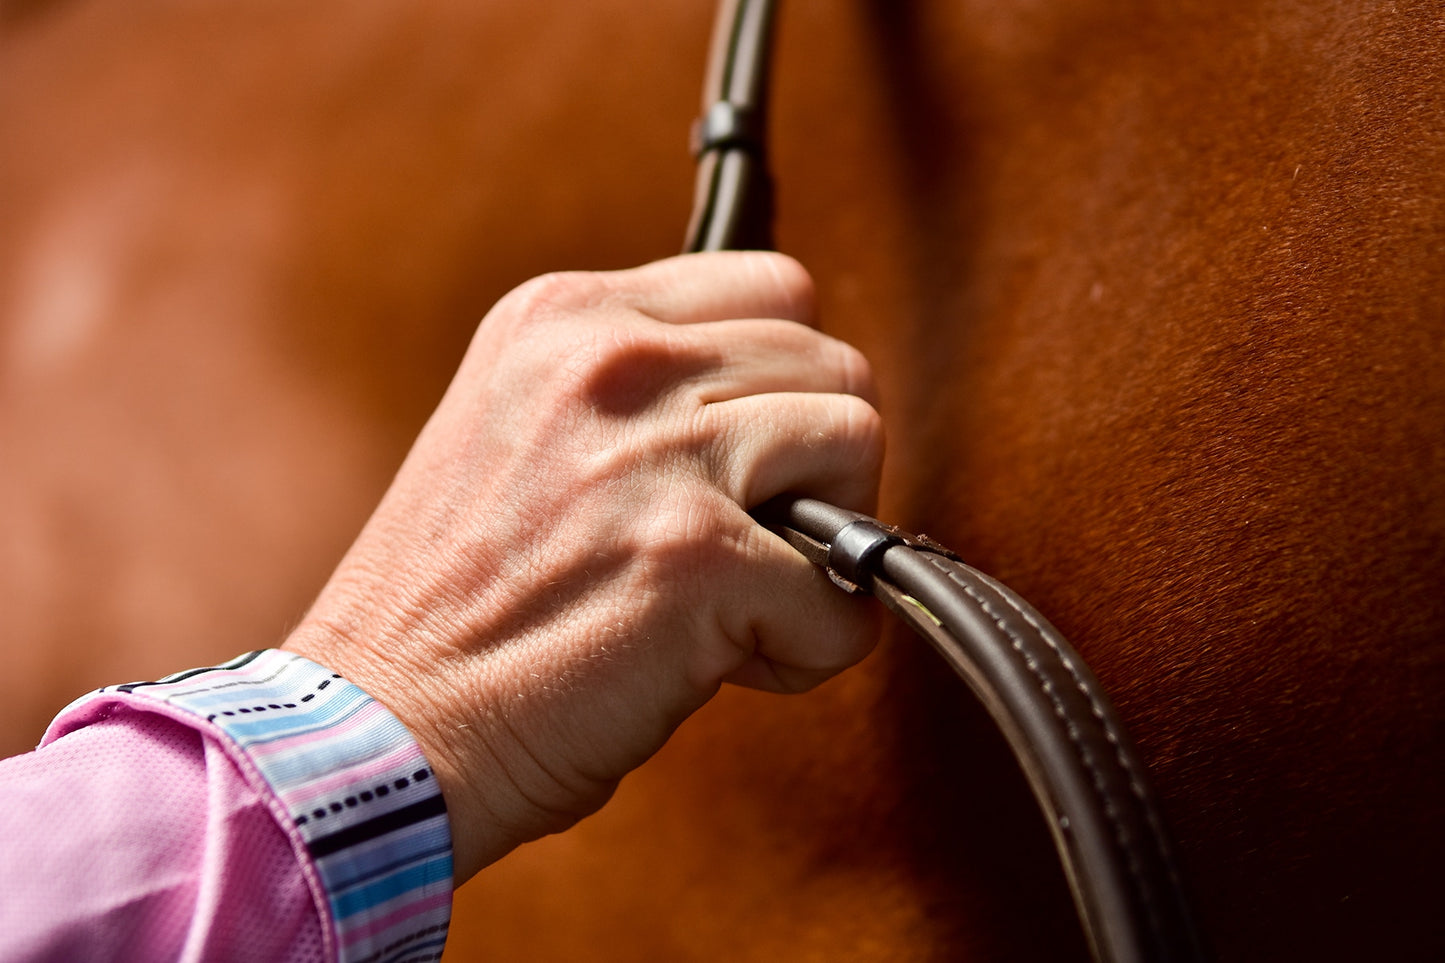 Thinline English Wrapped Reins With Notches-Thinline Global Australia-The Equestrian